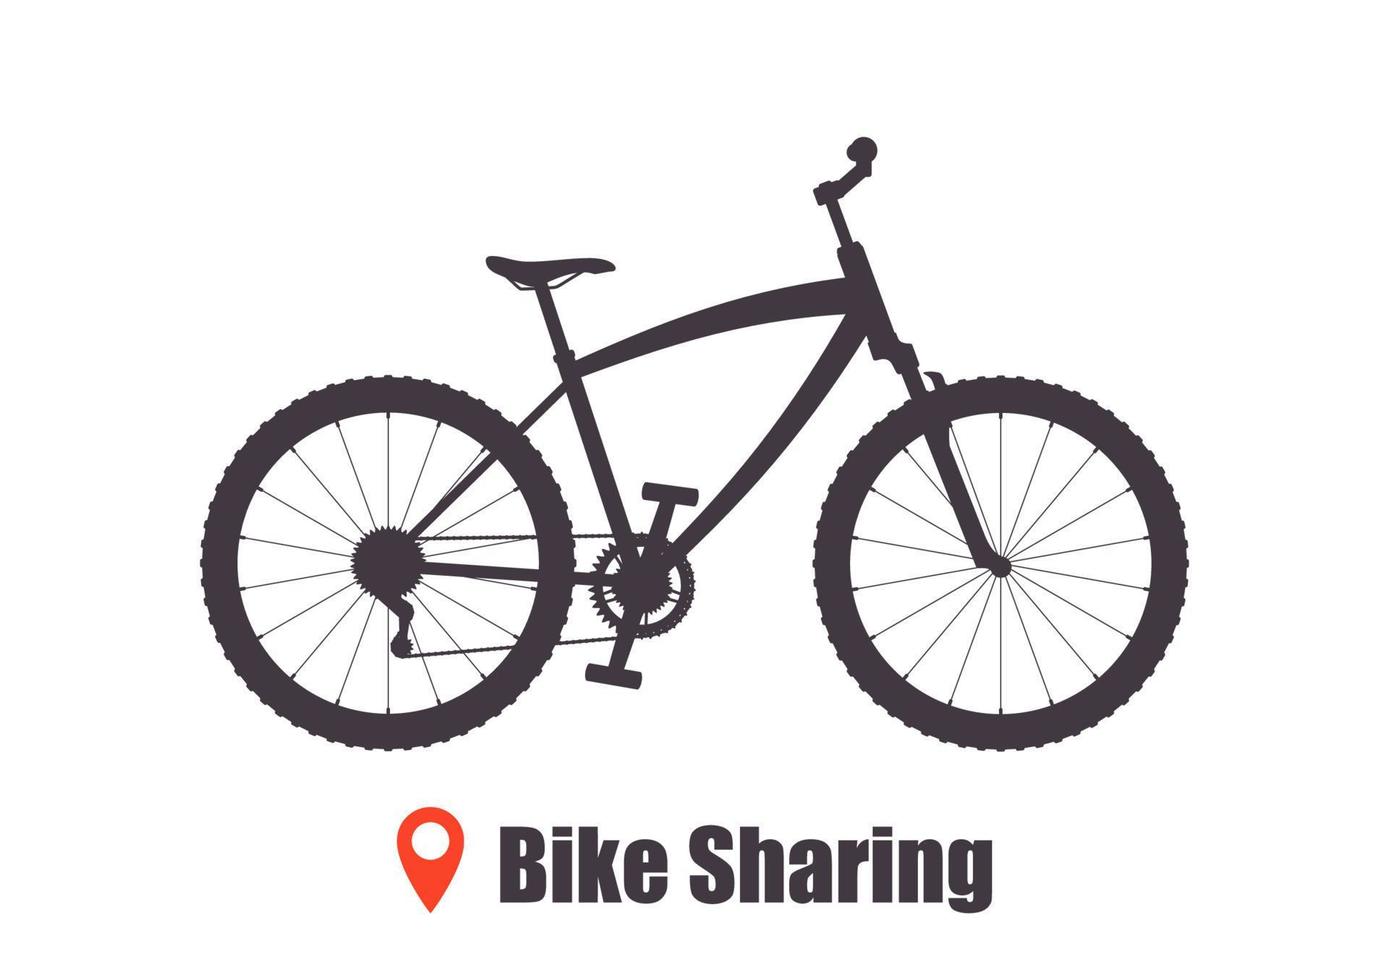 Modern city or mountain bicycle for bike sharing service. Multi-speed sport bicycle for adults. Bike sharing concept illustration, vector. vector